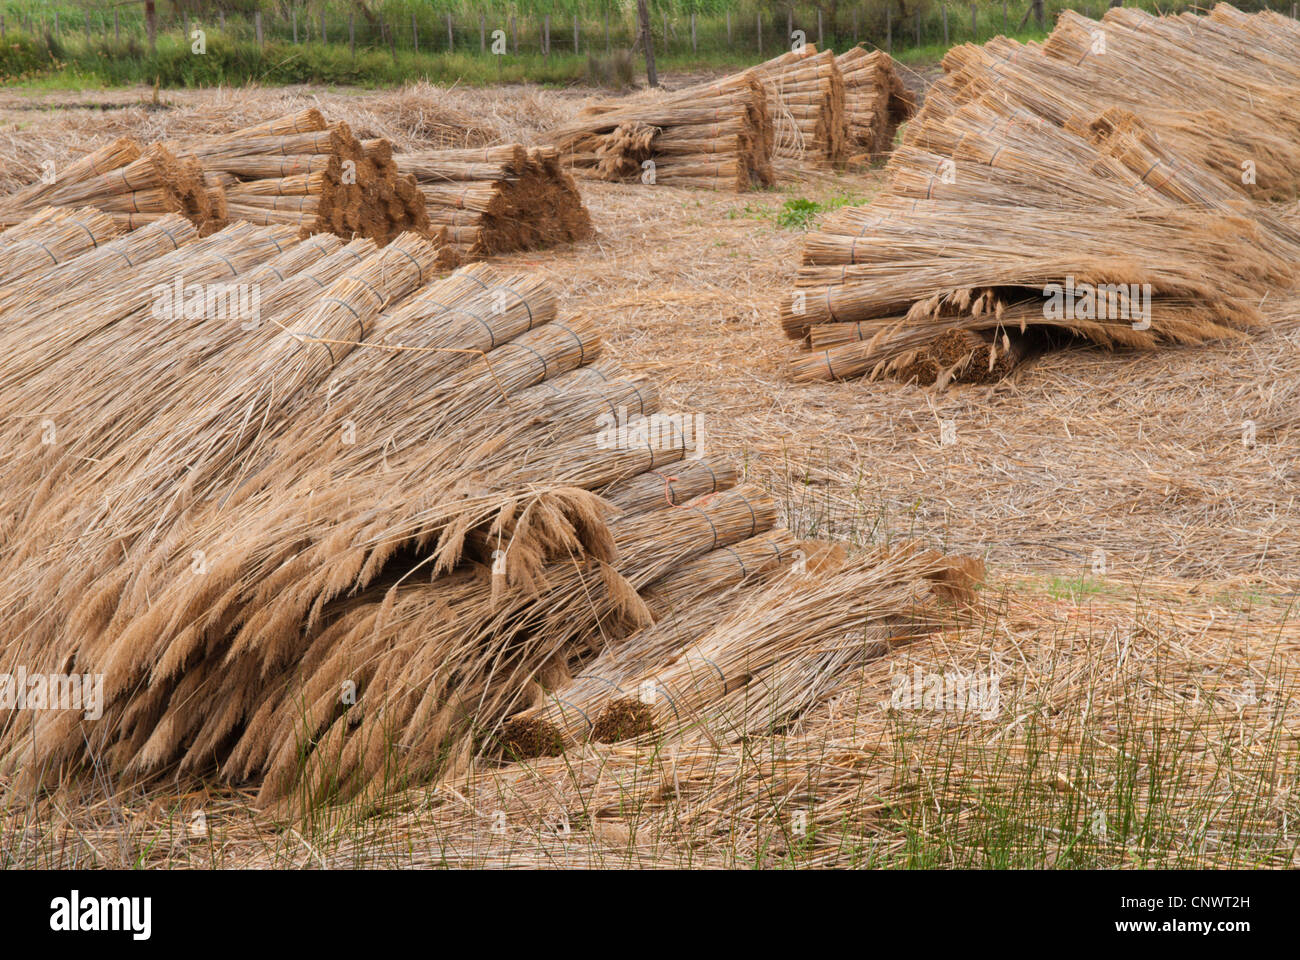 reed bunches drying, used as building material, France, Camargue Stock Photo